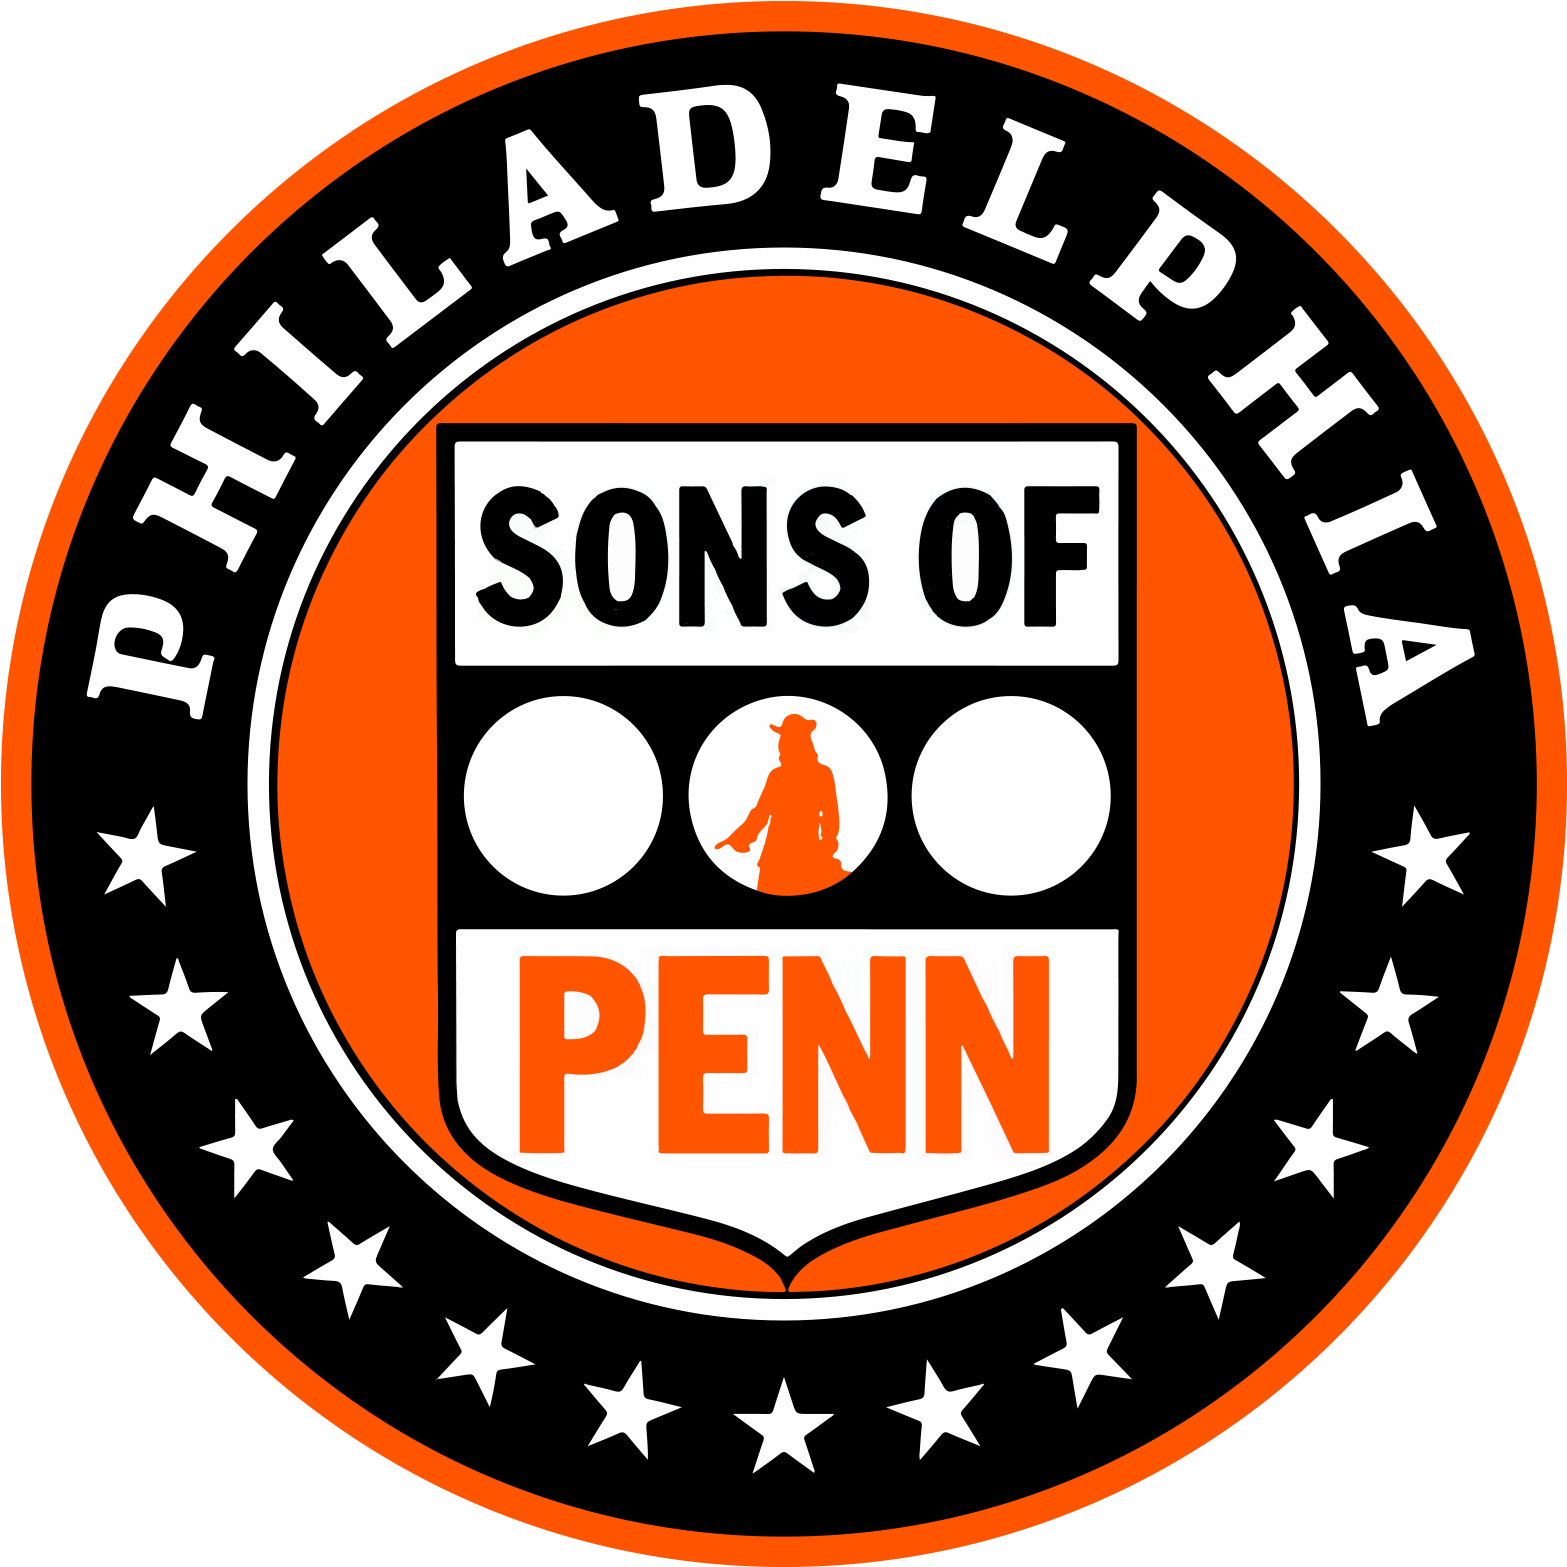 Sons Of Penn - Good Job Without Background (1600x1600)